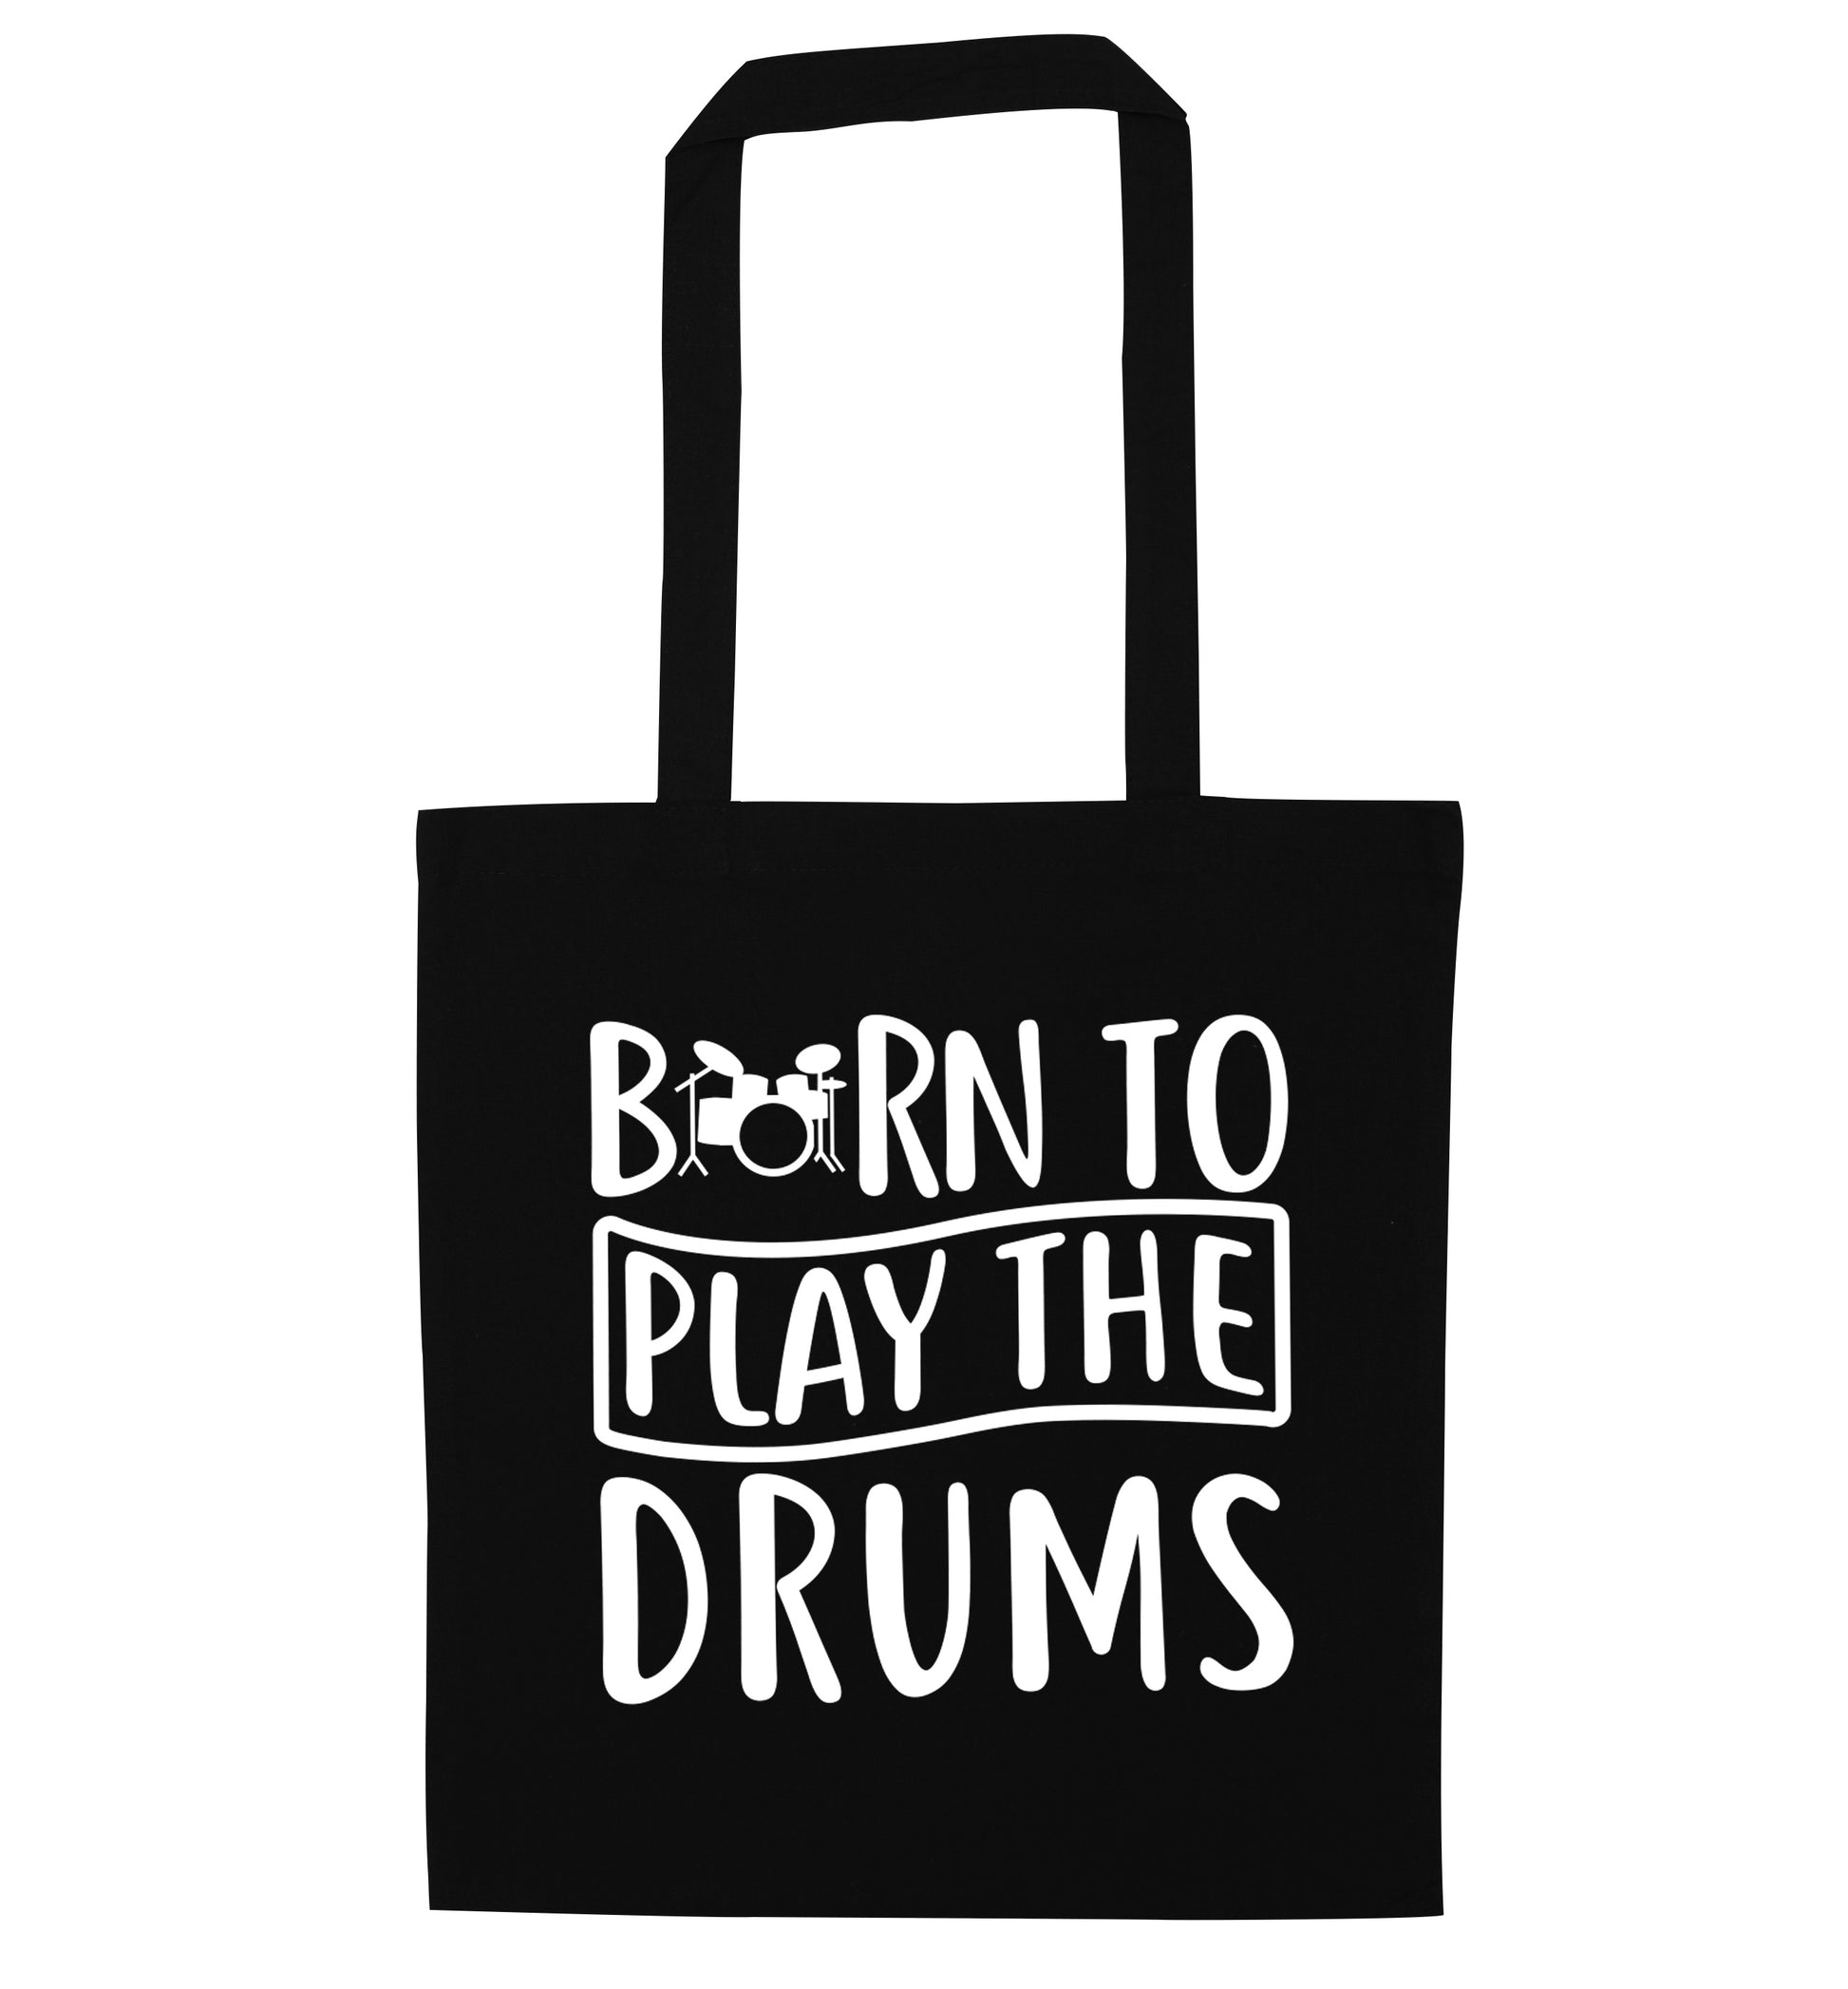 Born to play the drums black tote bag